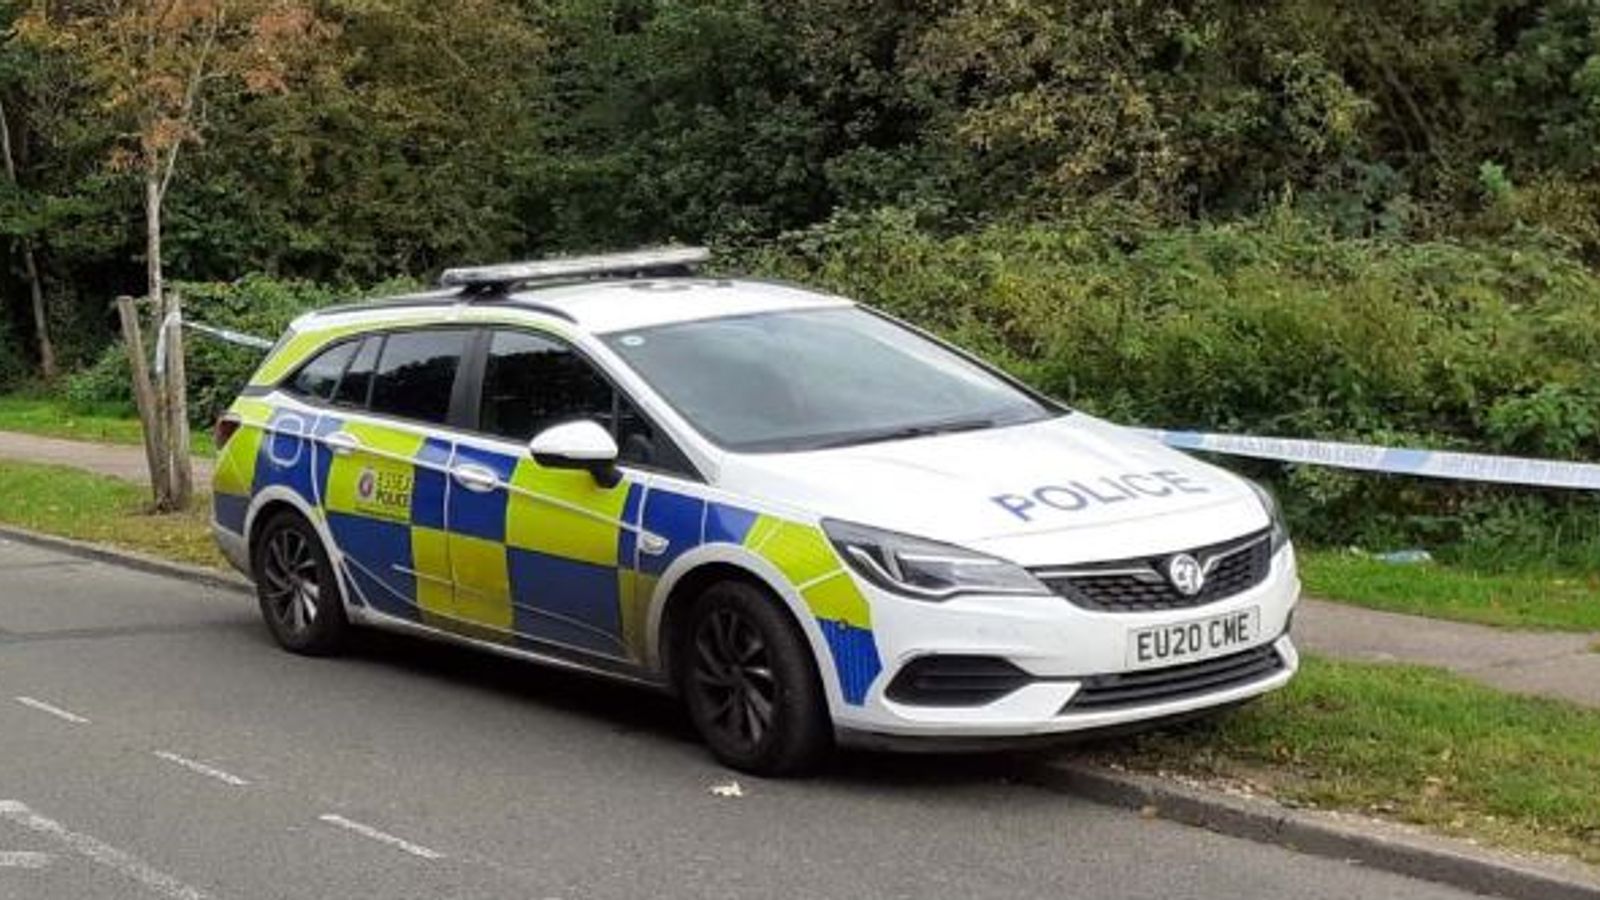 Body found in Essex woodland after man and woman 'taken against their will'